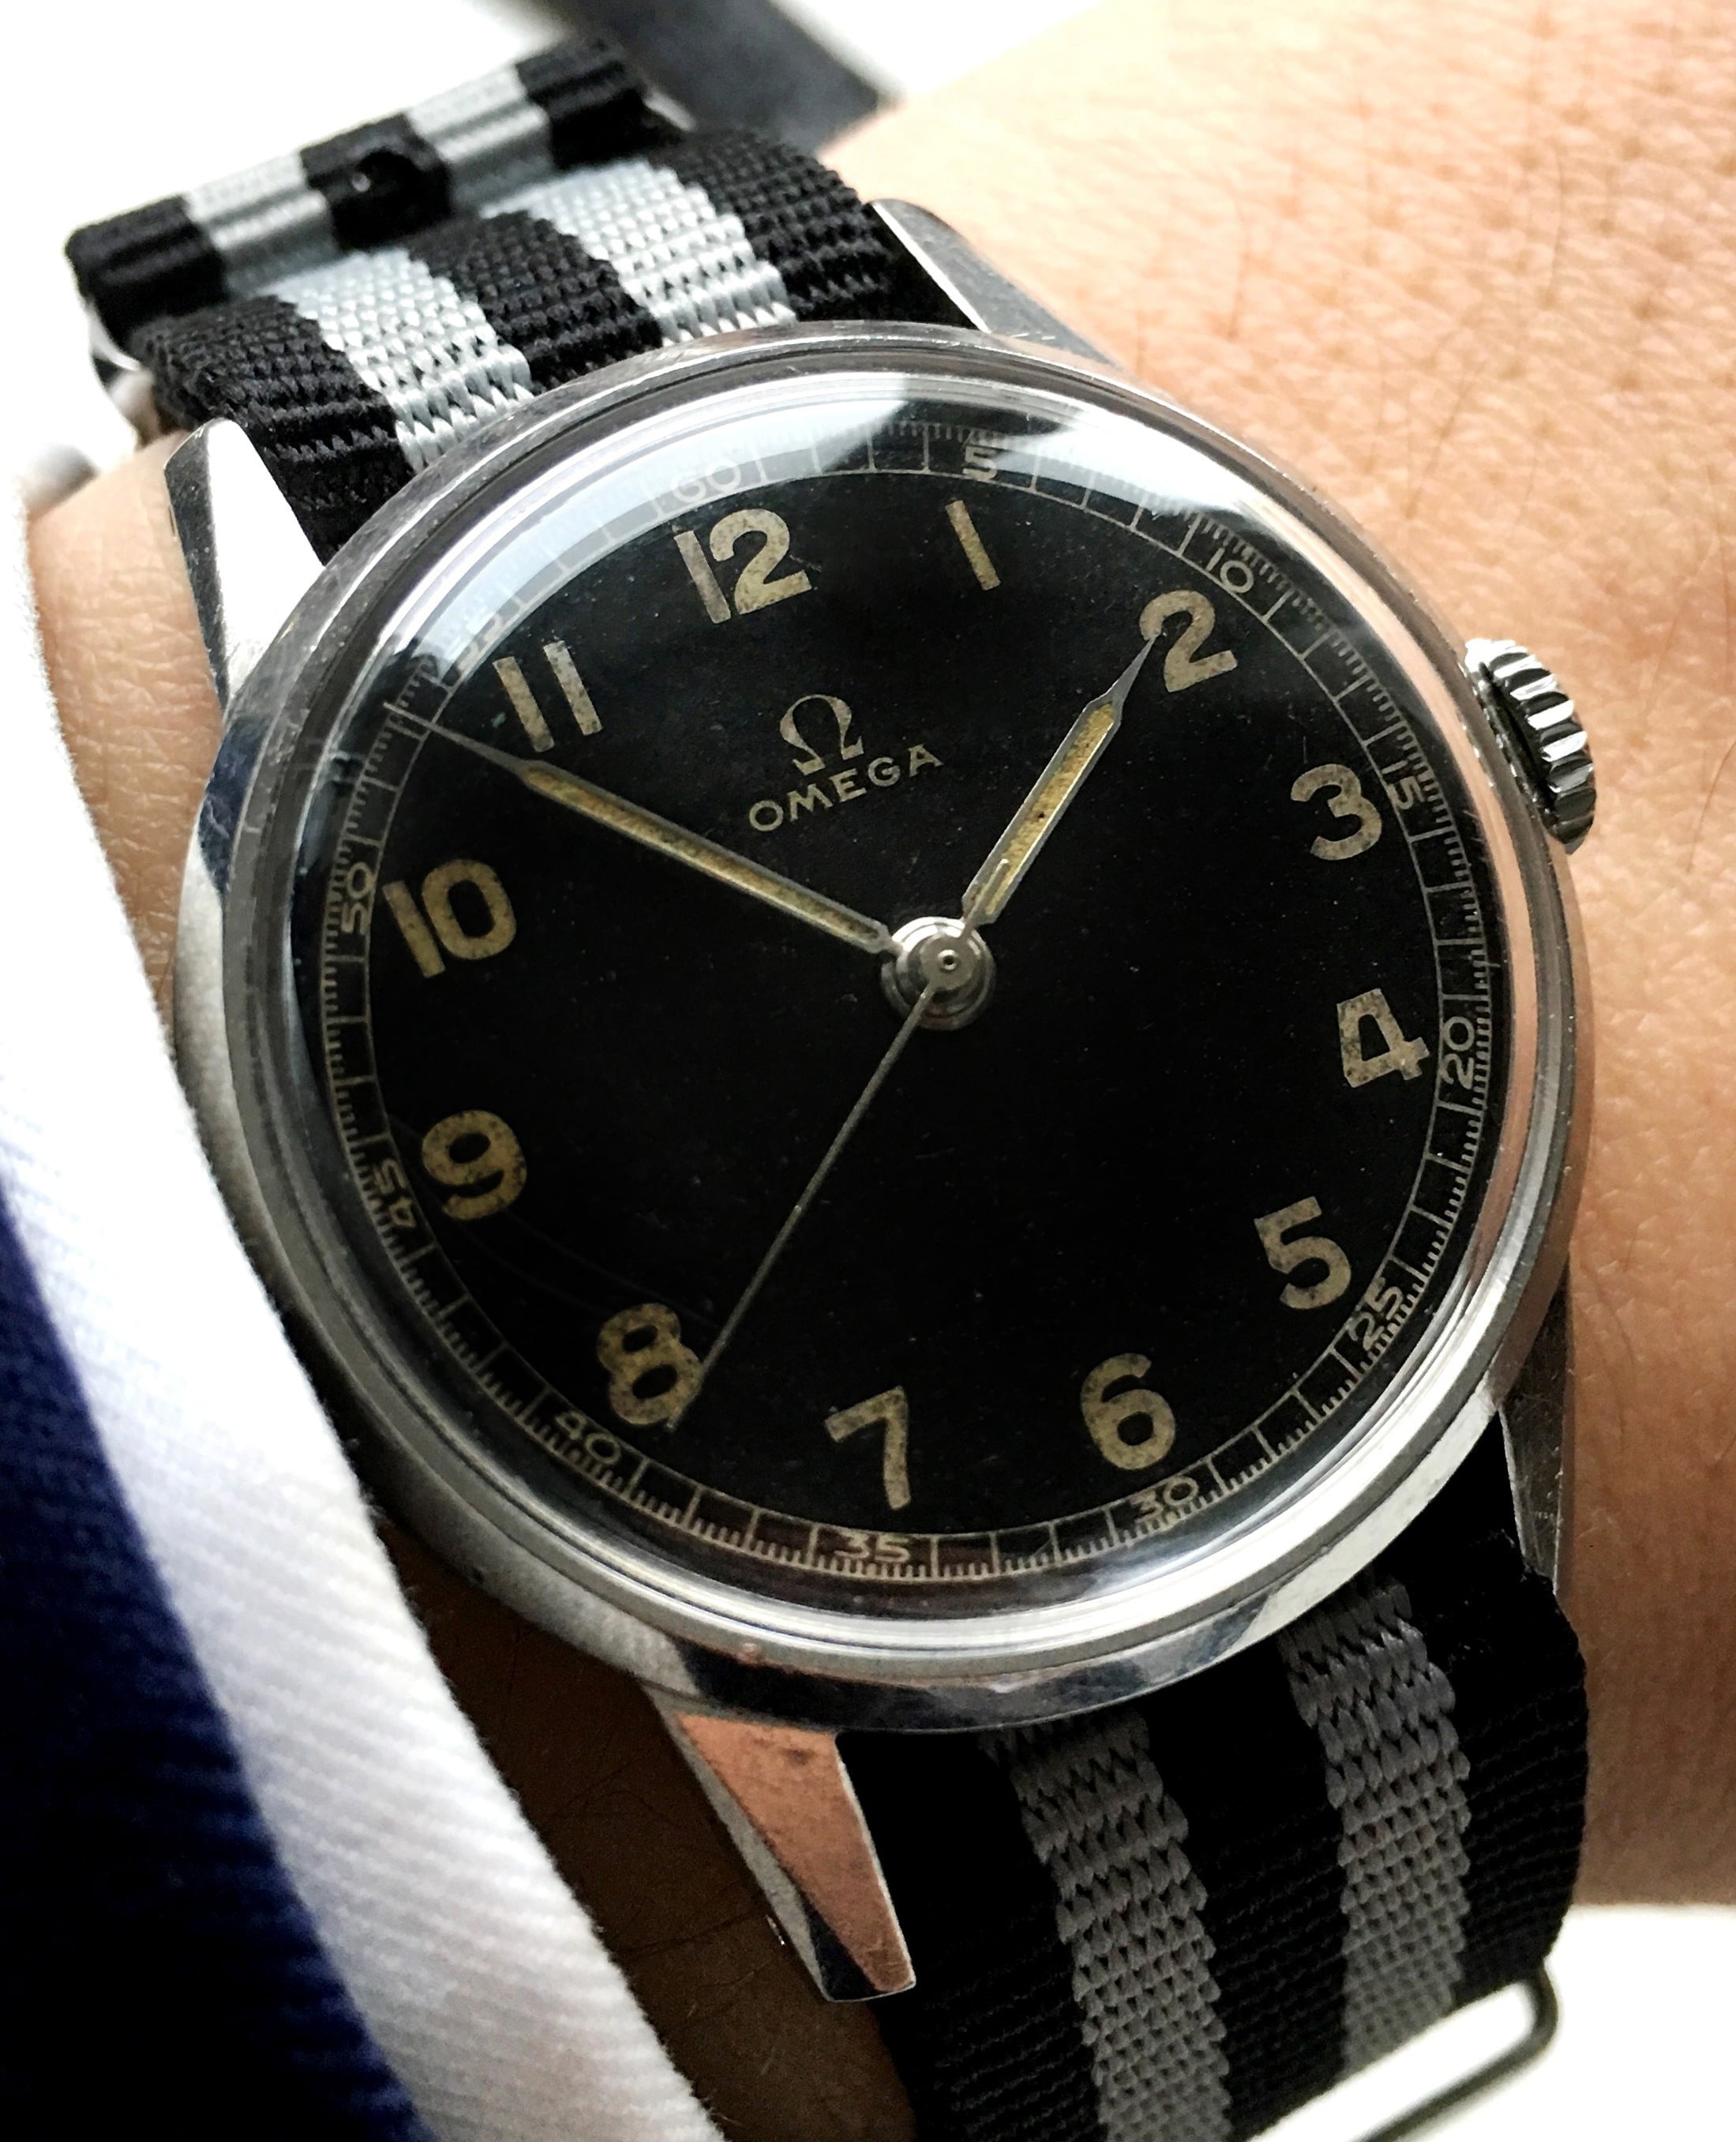 30t2 Omega Military watch with blck 